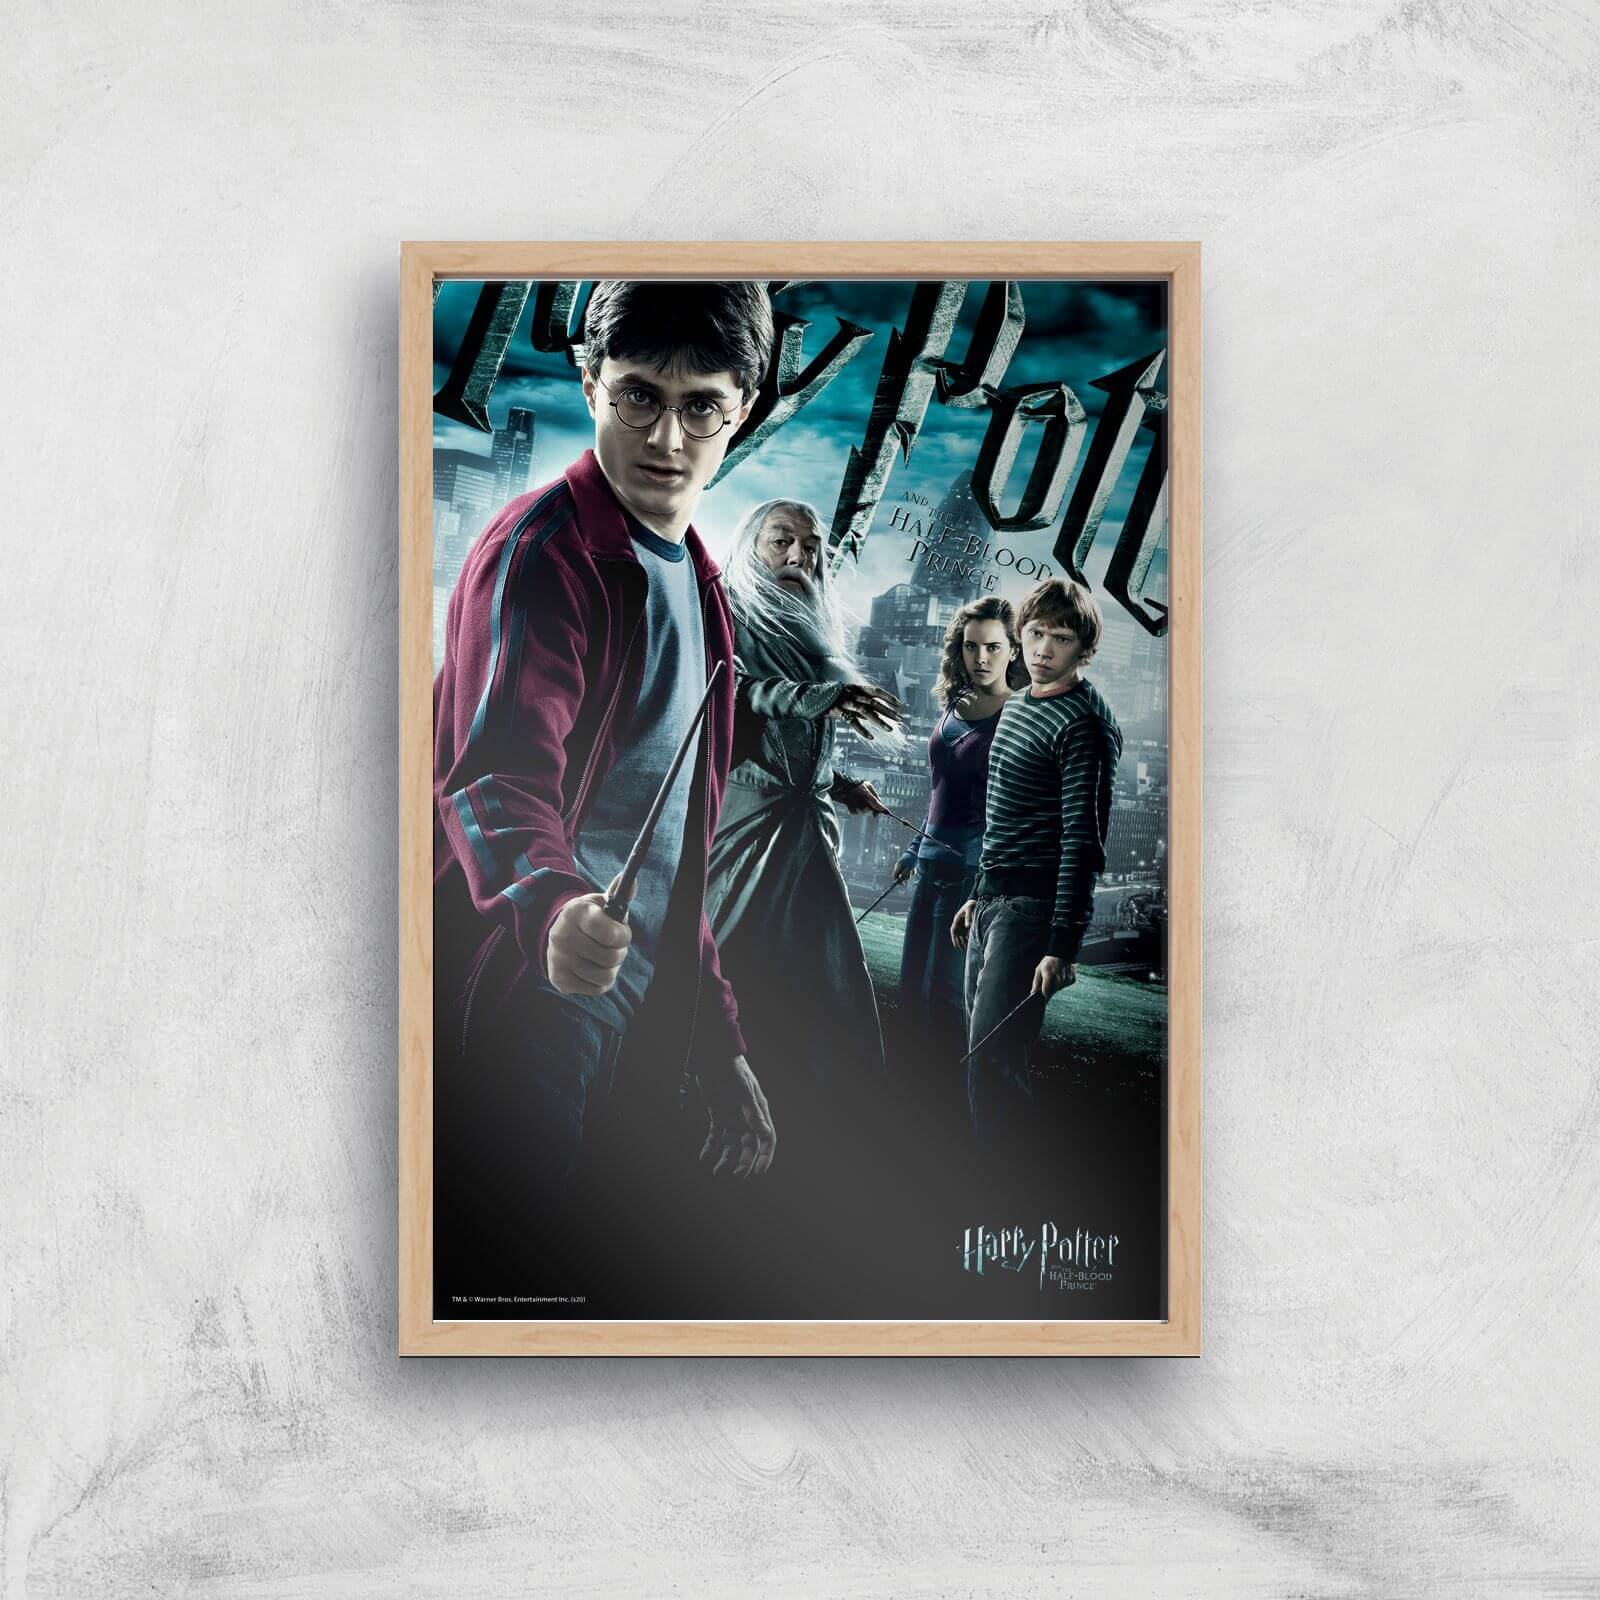 Harry Potter and the Half-Blood Prince Giclee Art Print - A3 - Wooden Frame